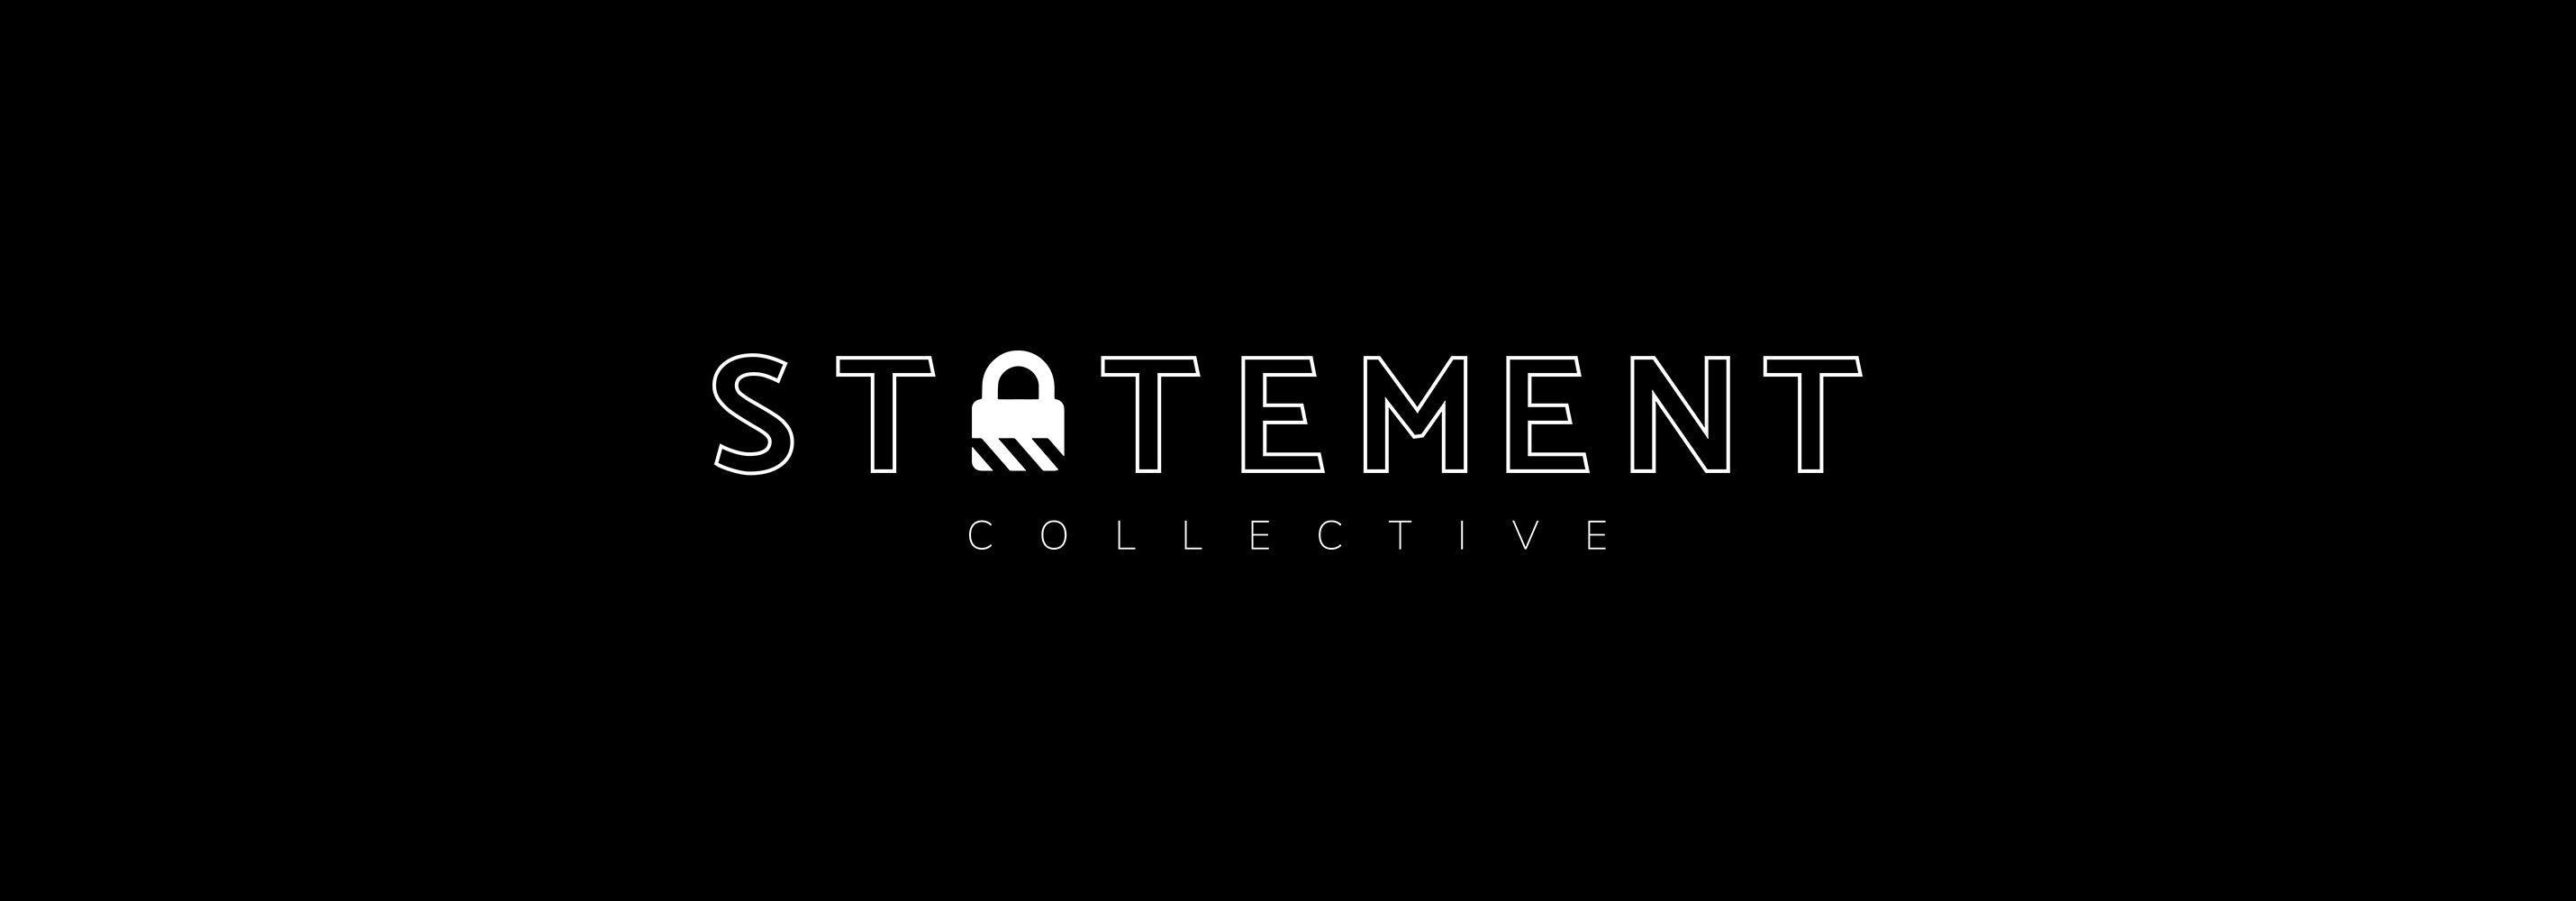 Statement Collective